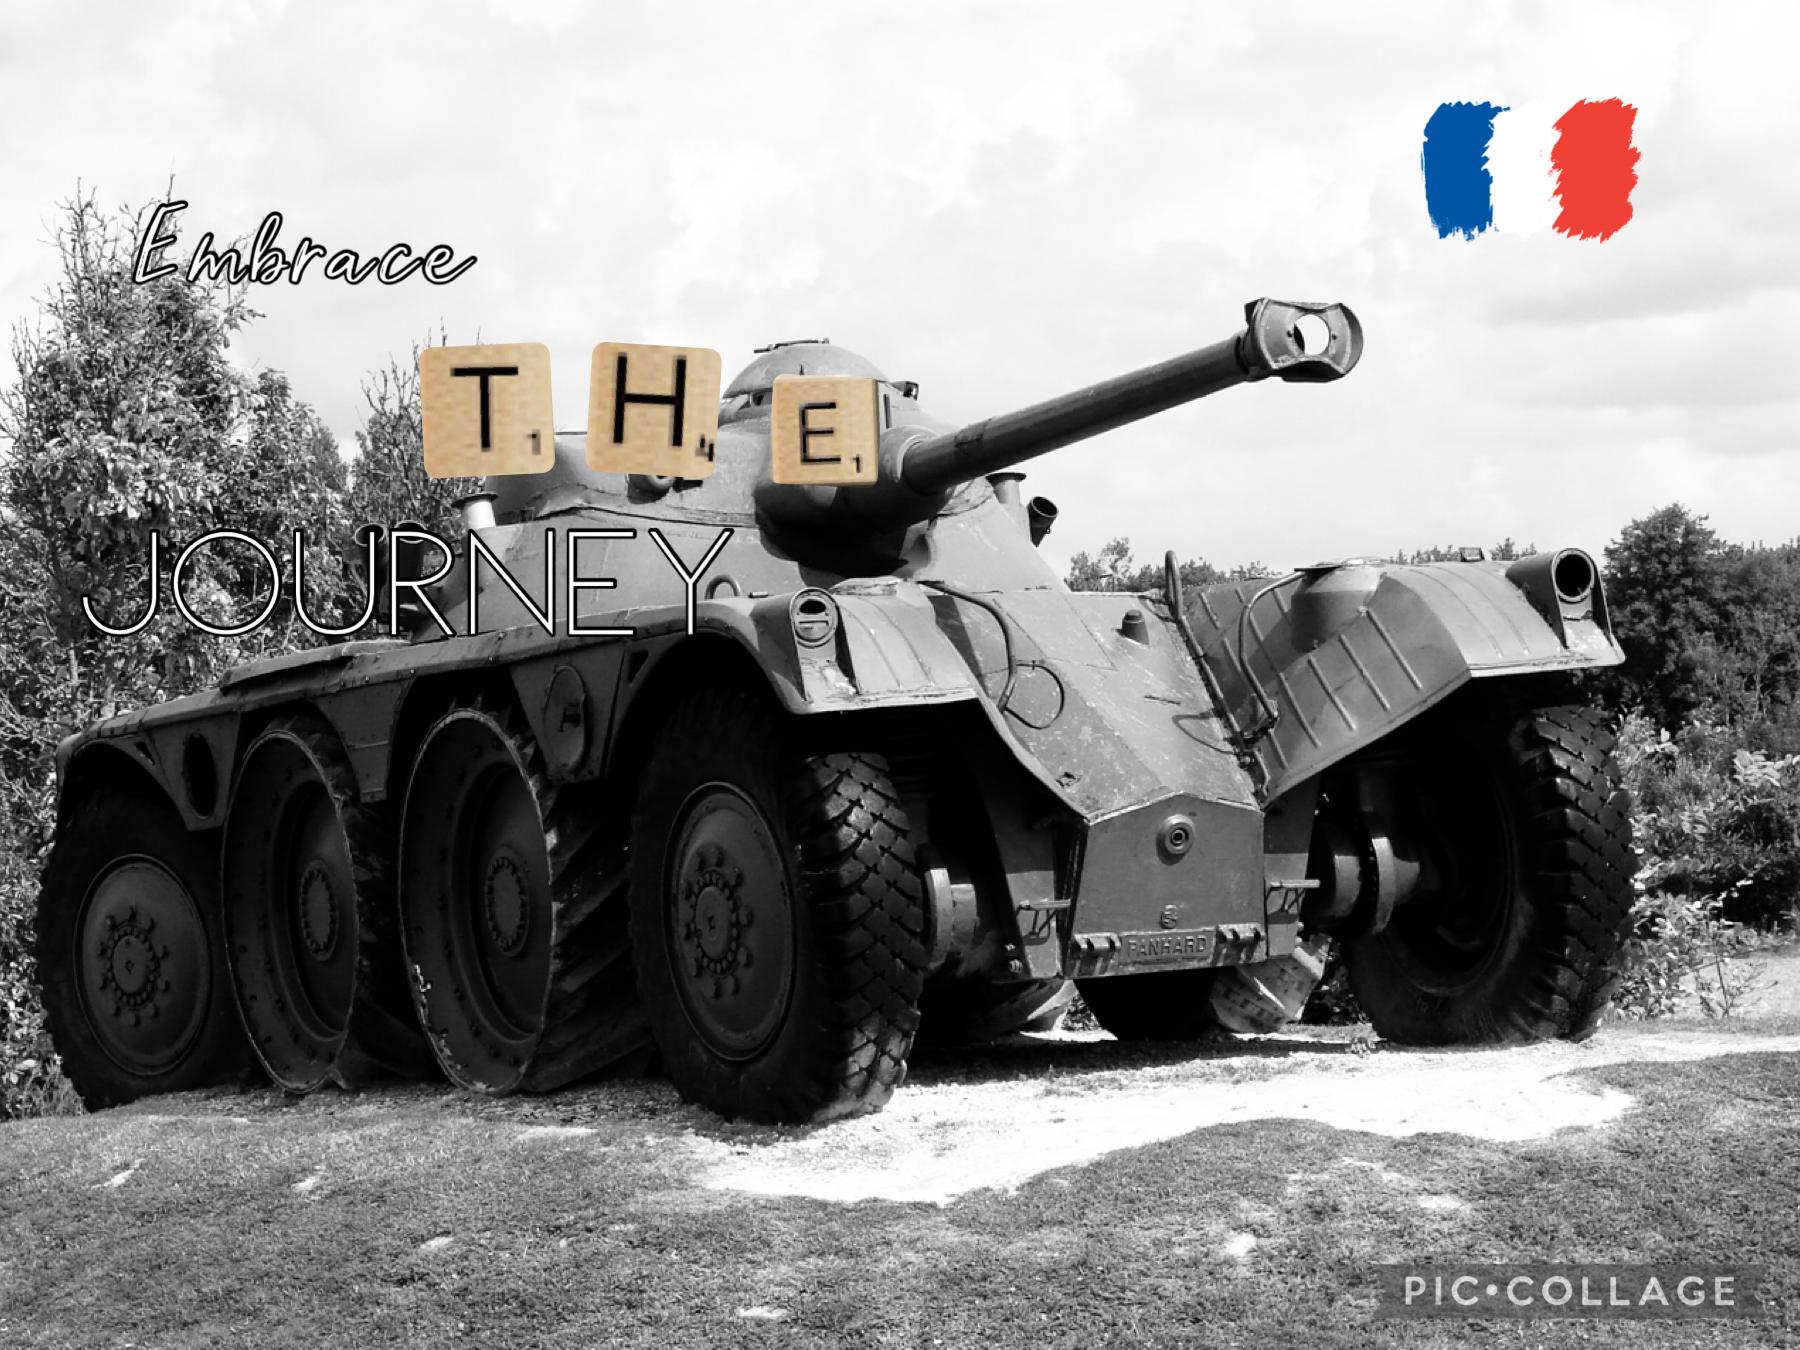                   🔳tap🔳
    🇫🇷 French E.B.R tank maybe doing Comet 1 later